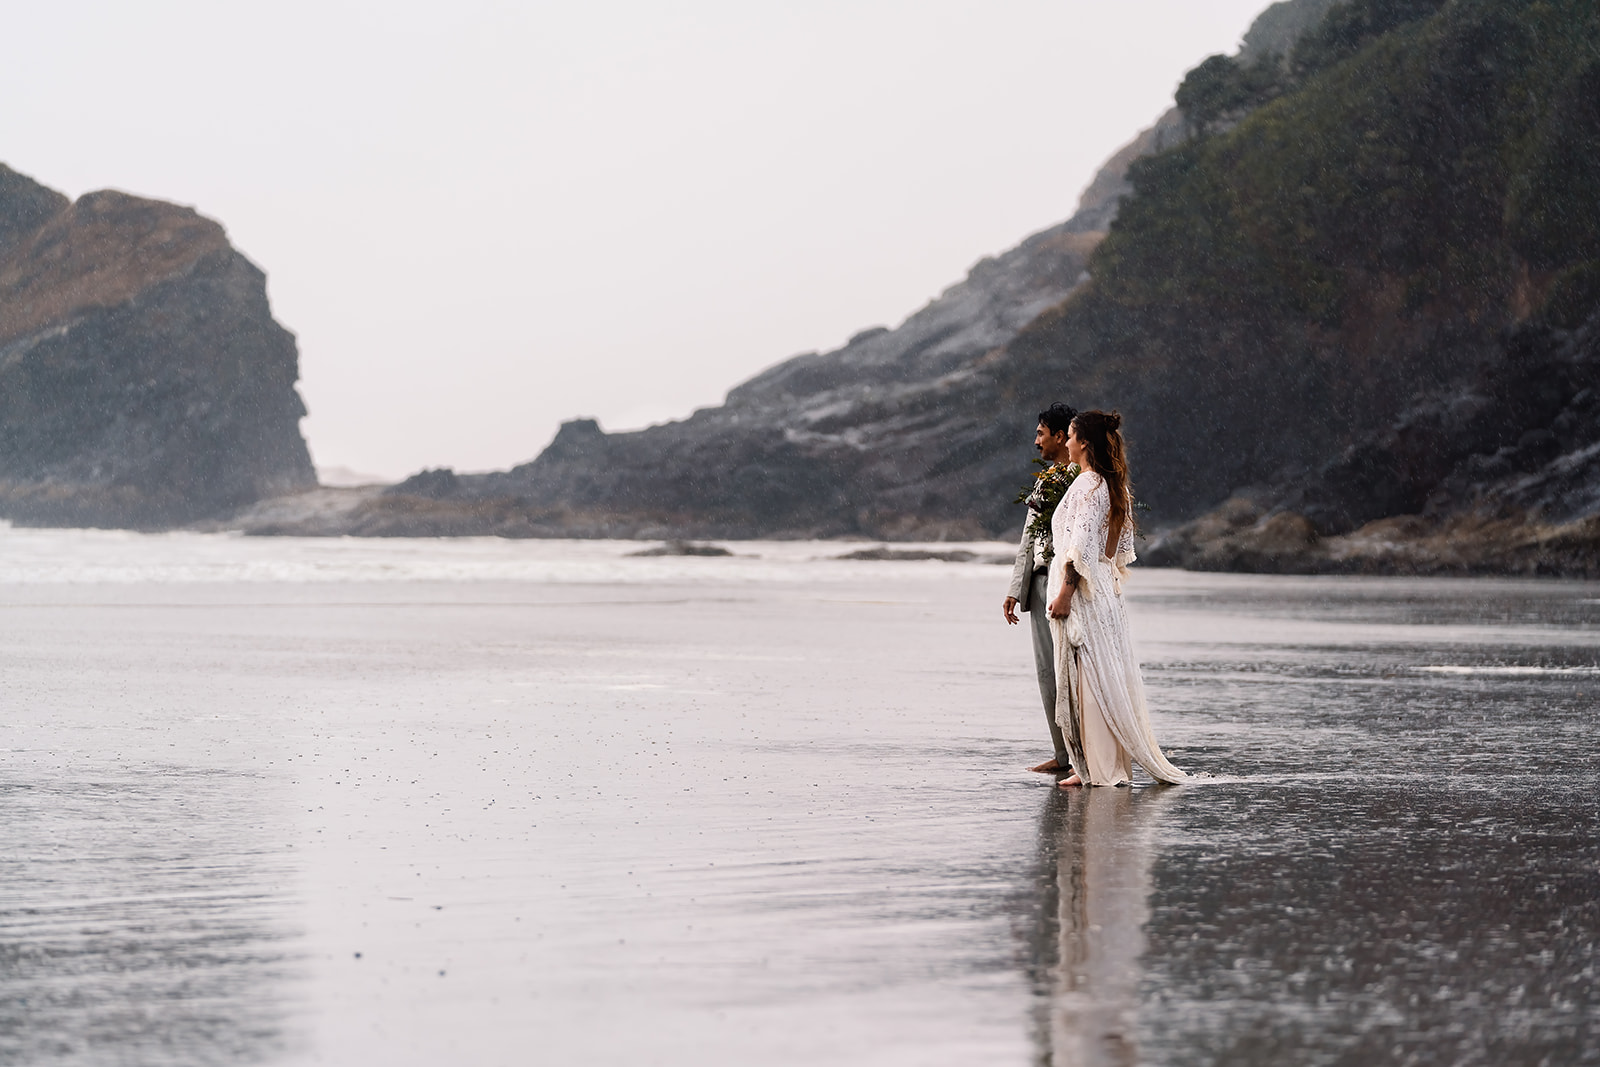 During their surfer wedding, a couple gazes out towards the moody ocean. The rain can be seen pouring around them as they stand in awe of the sea.